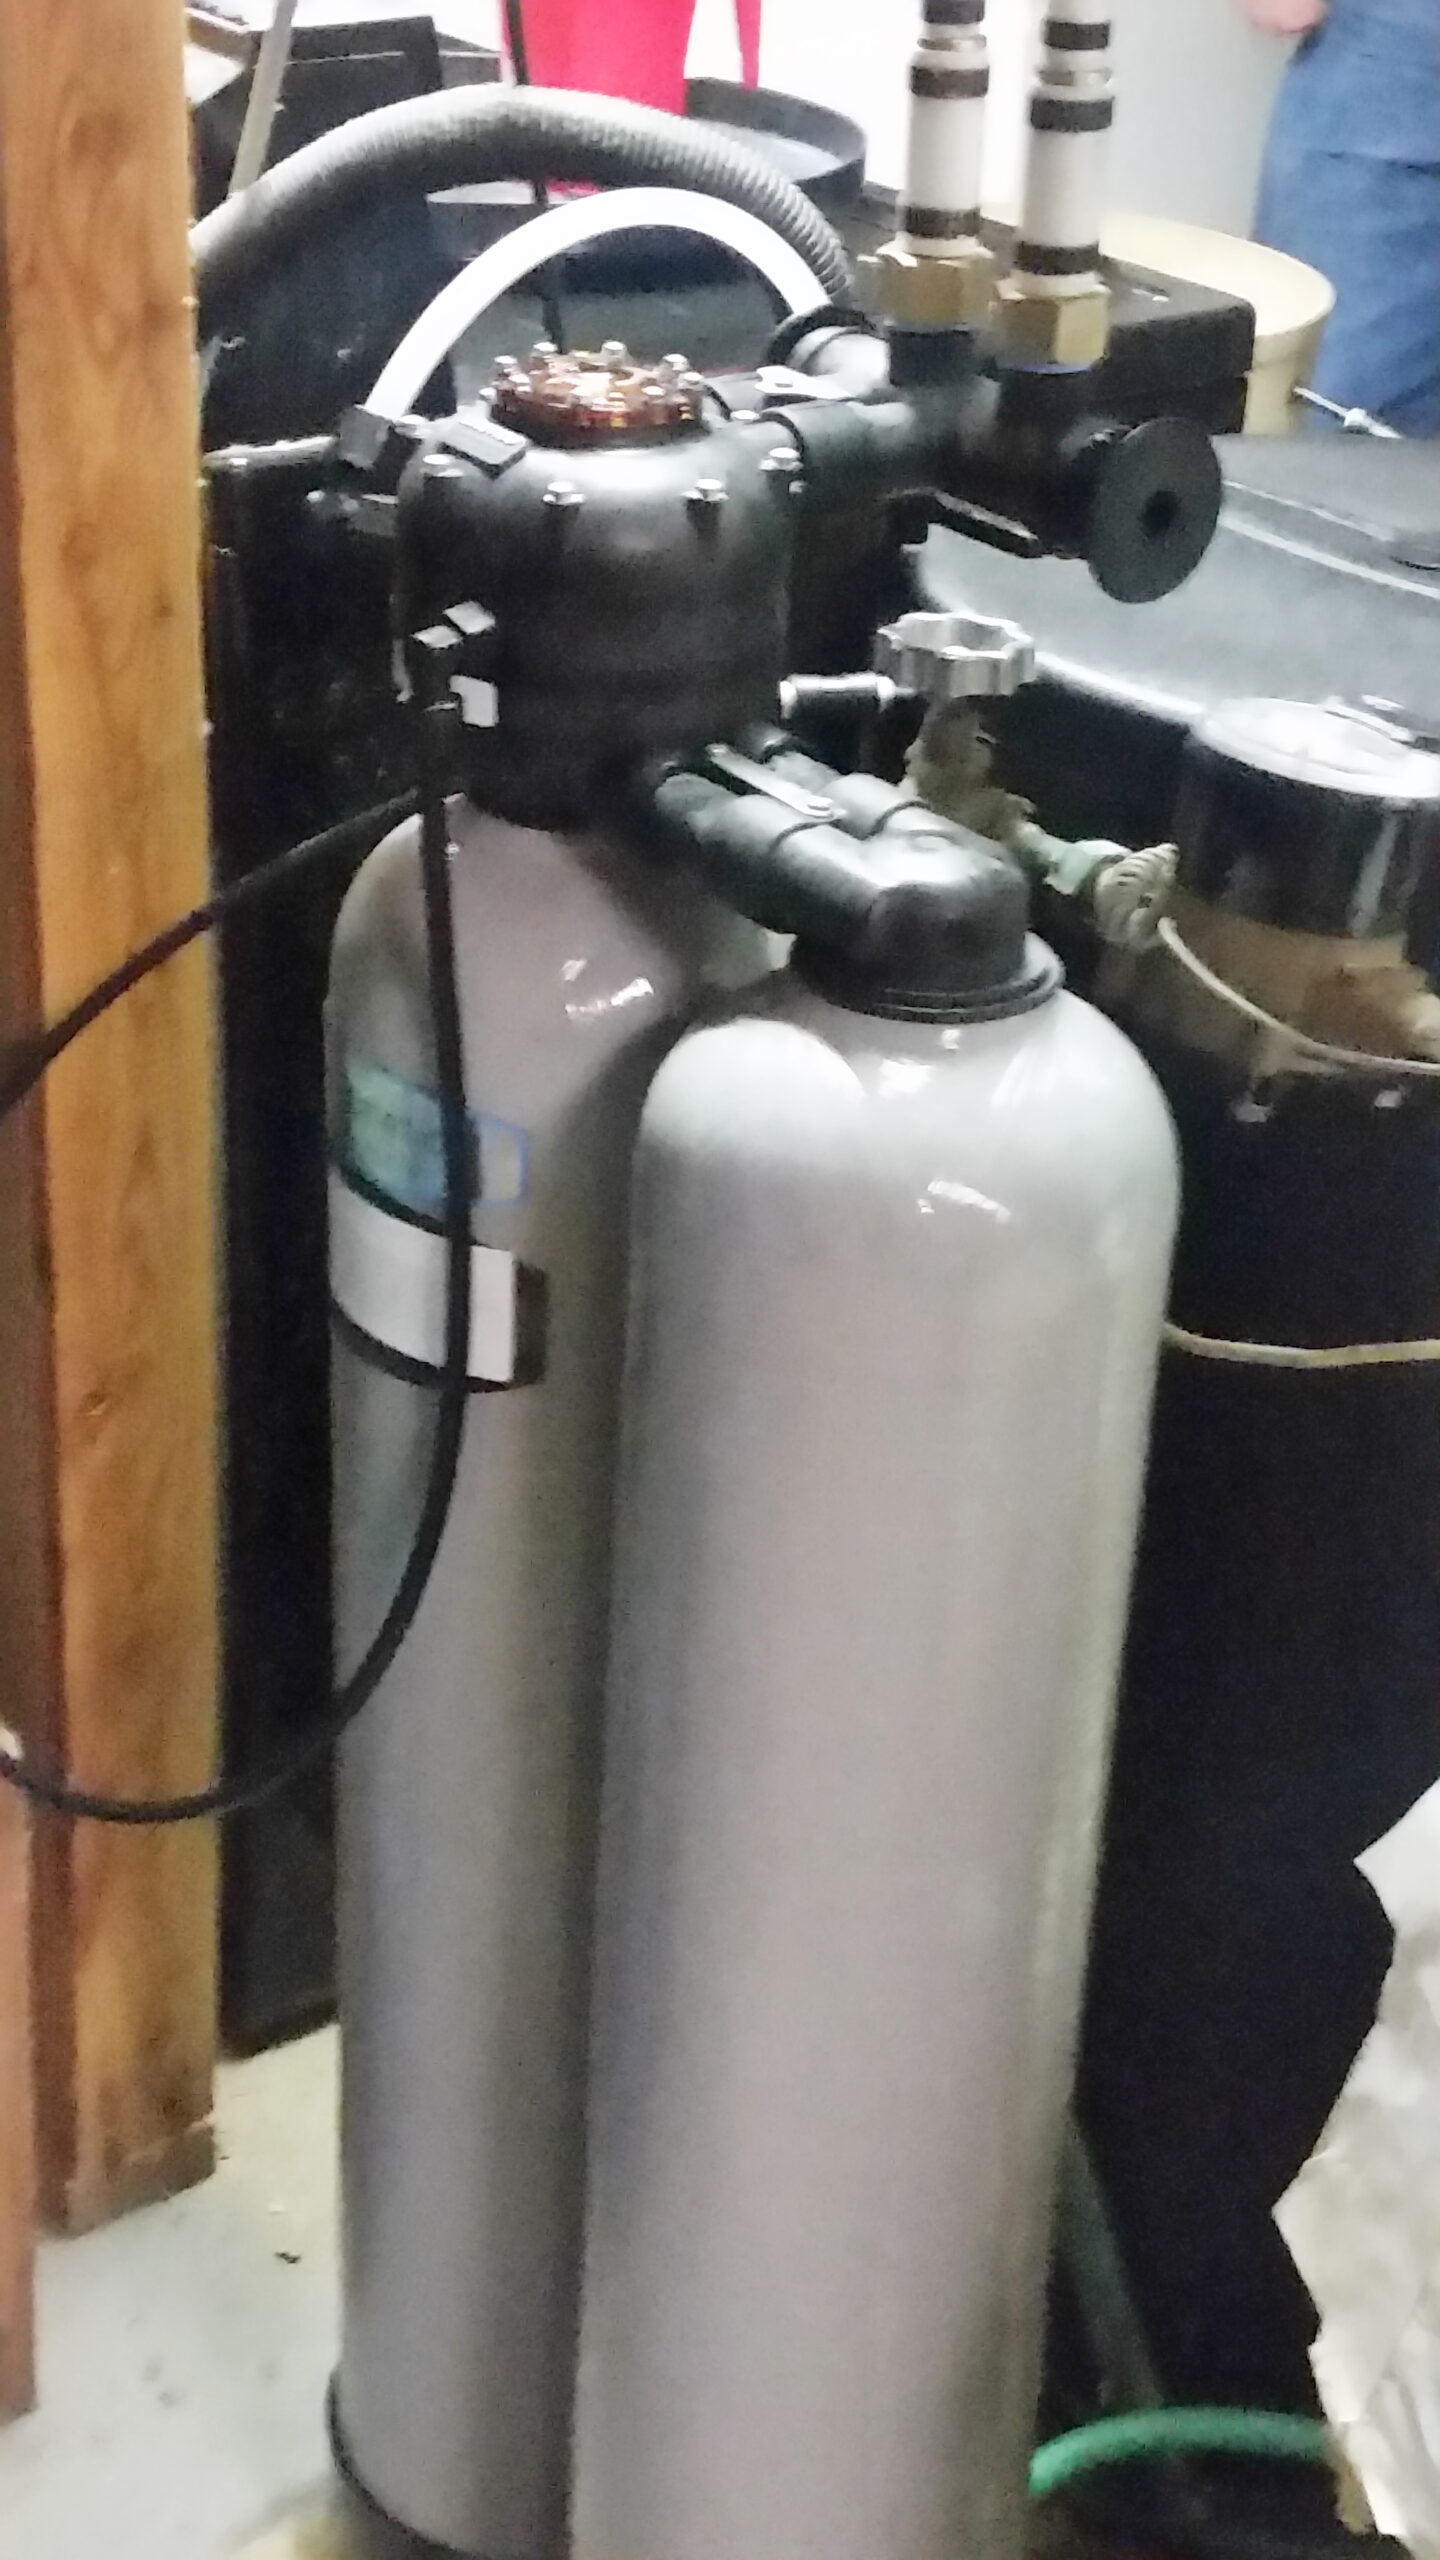 Upgrade their 39 year old Kinetico water softener with a new Kinetico system